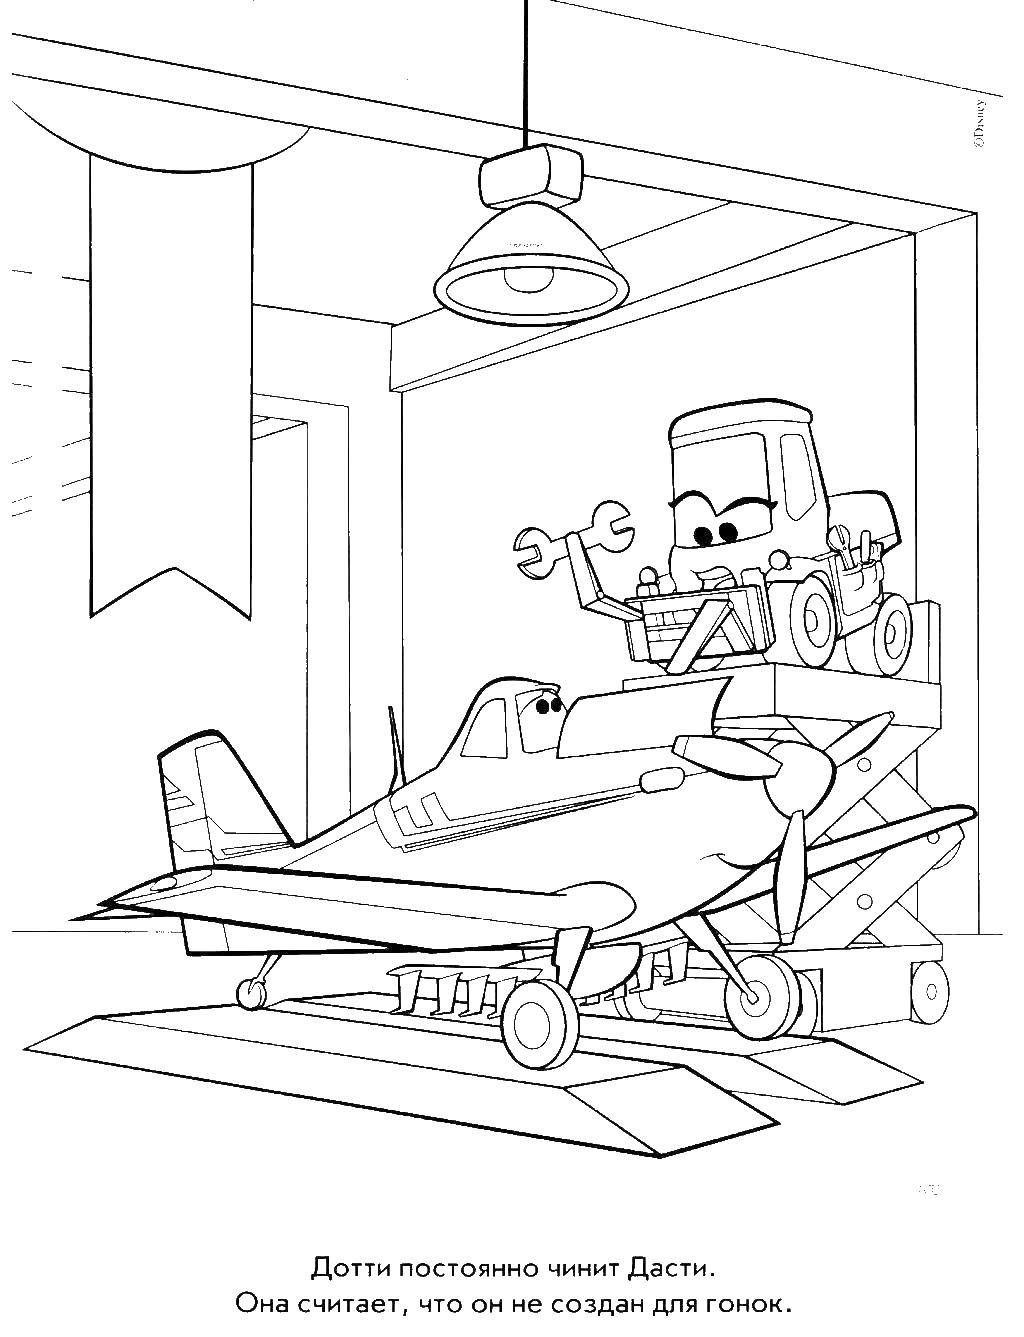 Coloring Dottie fixes dusty. Category coloring. Tags:  The Plane, Dusty.